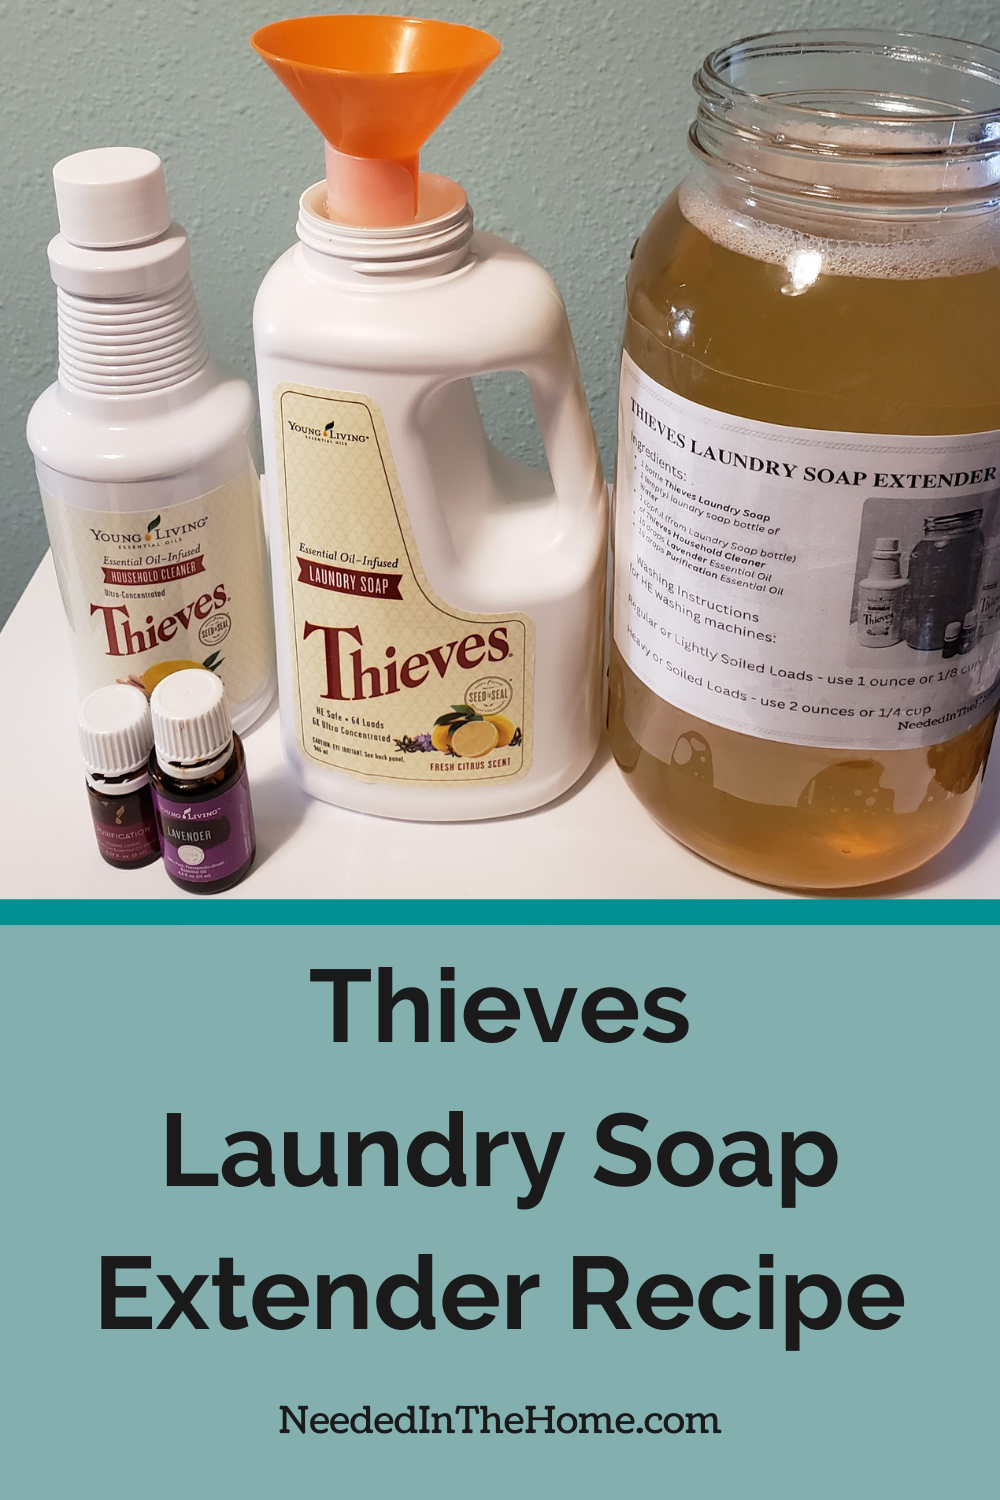 thieves laundry soap extender recipe young living ingredients cleaner laundry detergent jar of amber liquid two bottle essential oils lavender purification neededinthehome